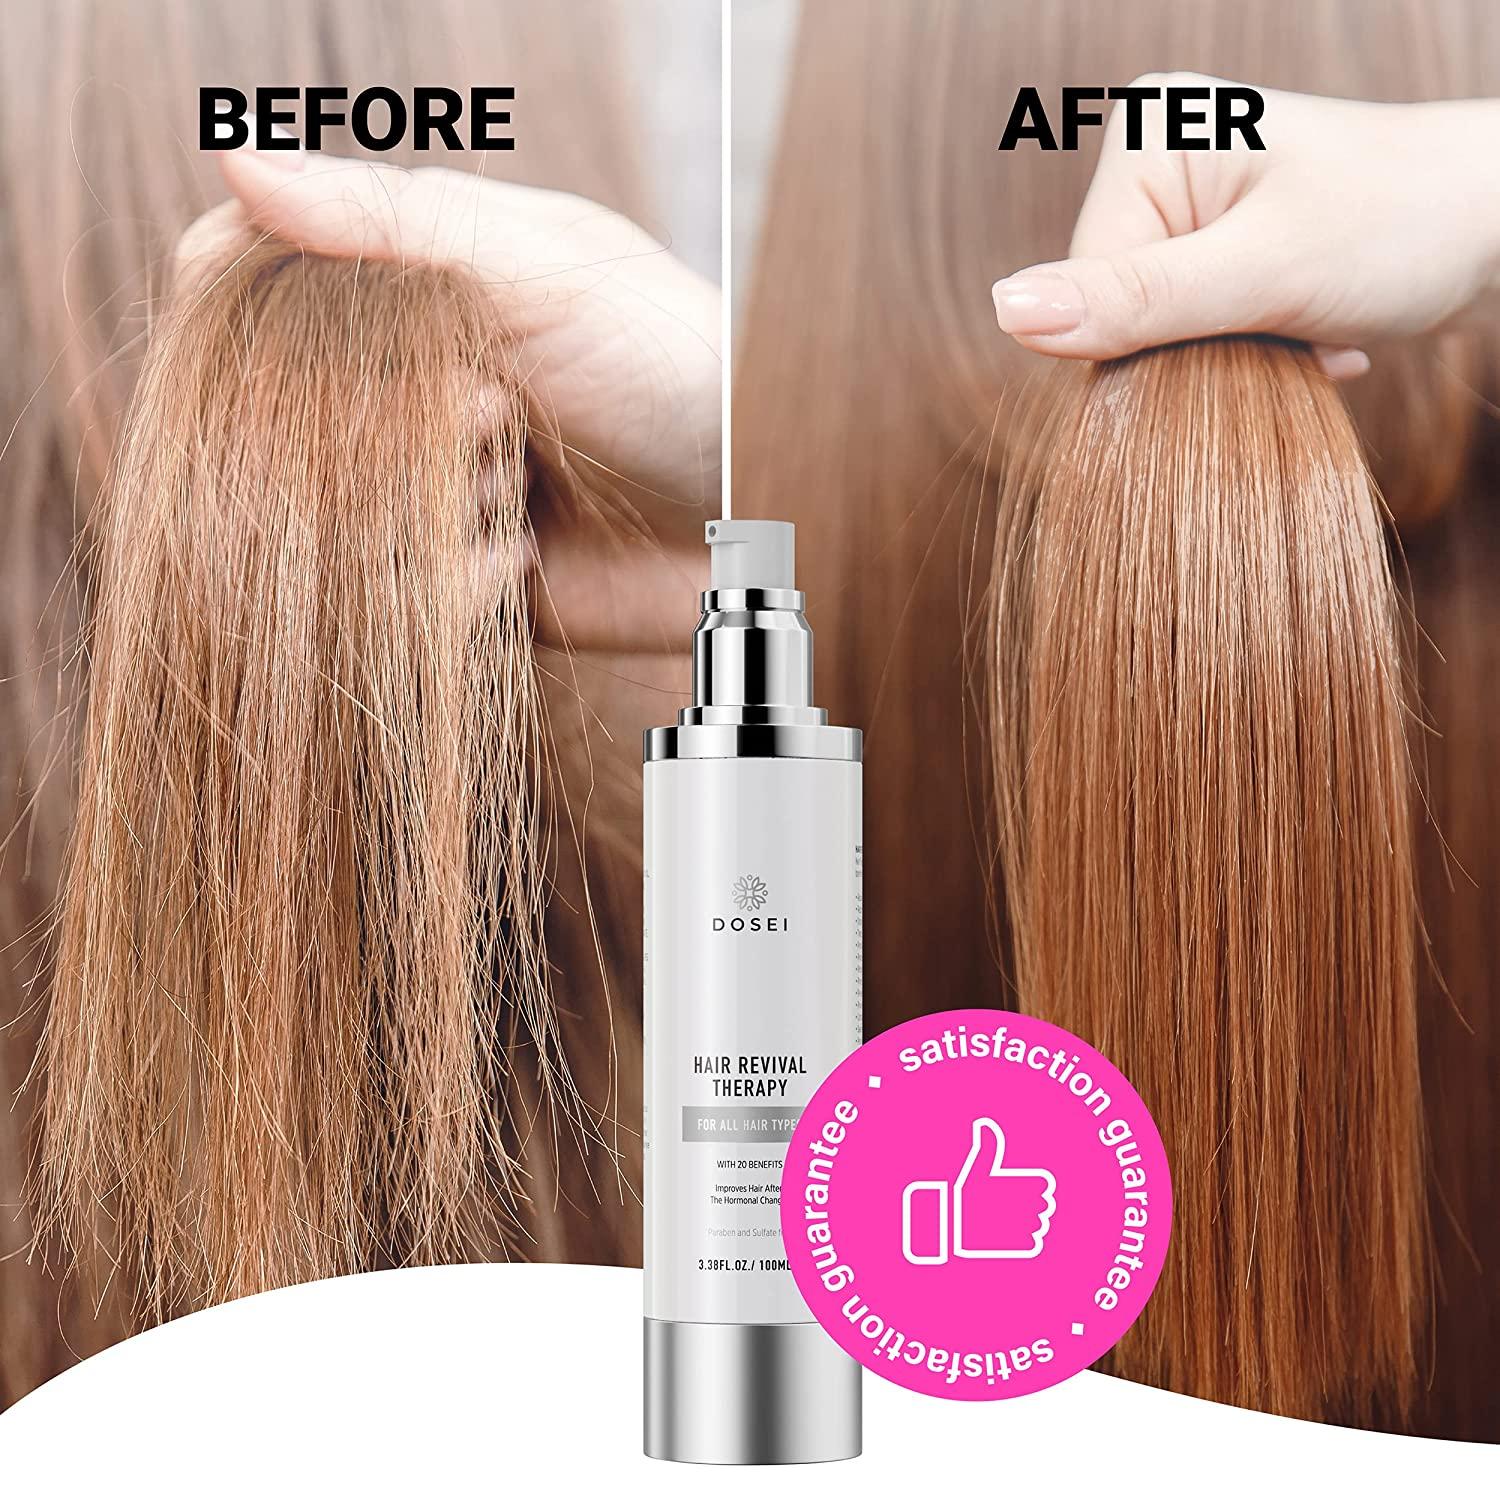 Damaged Hair Treatment Repairing - Split Ends Hair Treatment, Smoothing Hair  Serum for Frizzy and Damaged Hair, Leave in Conditioner Treatment for  Glossy, Silky, Shiny Hair